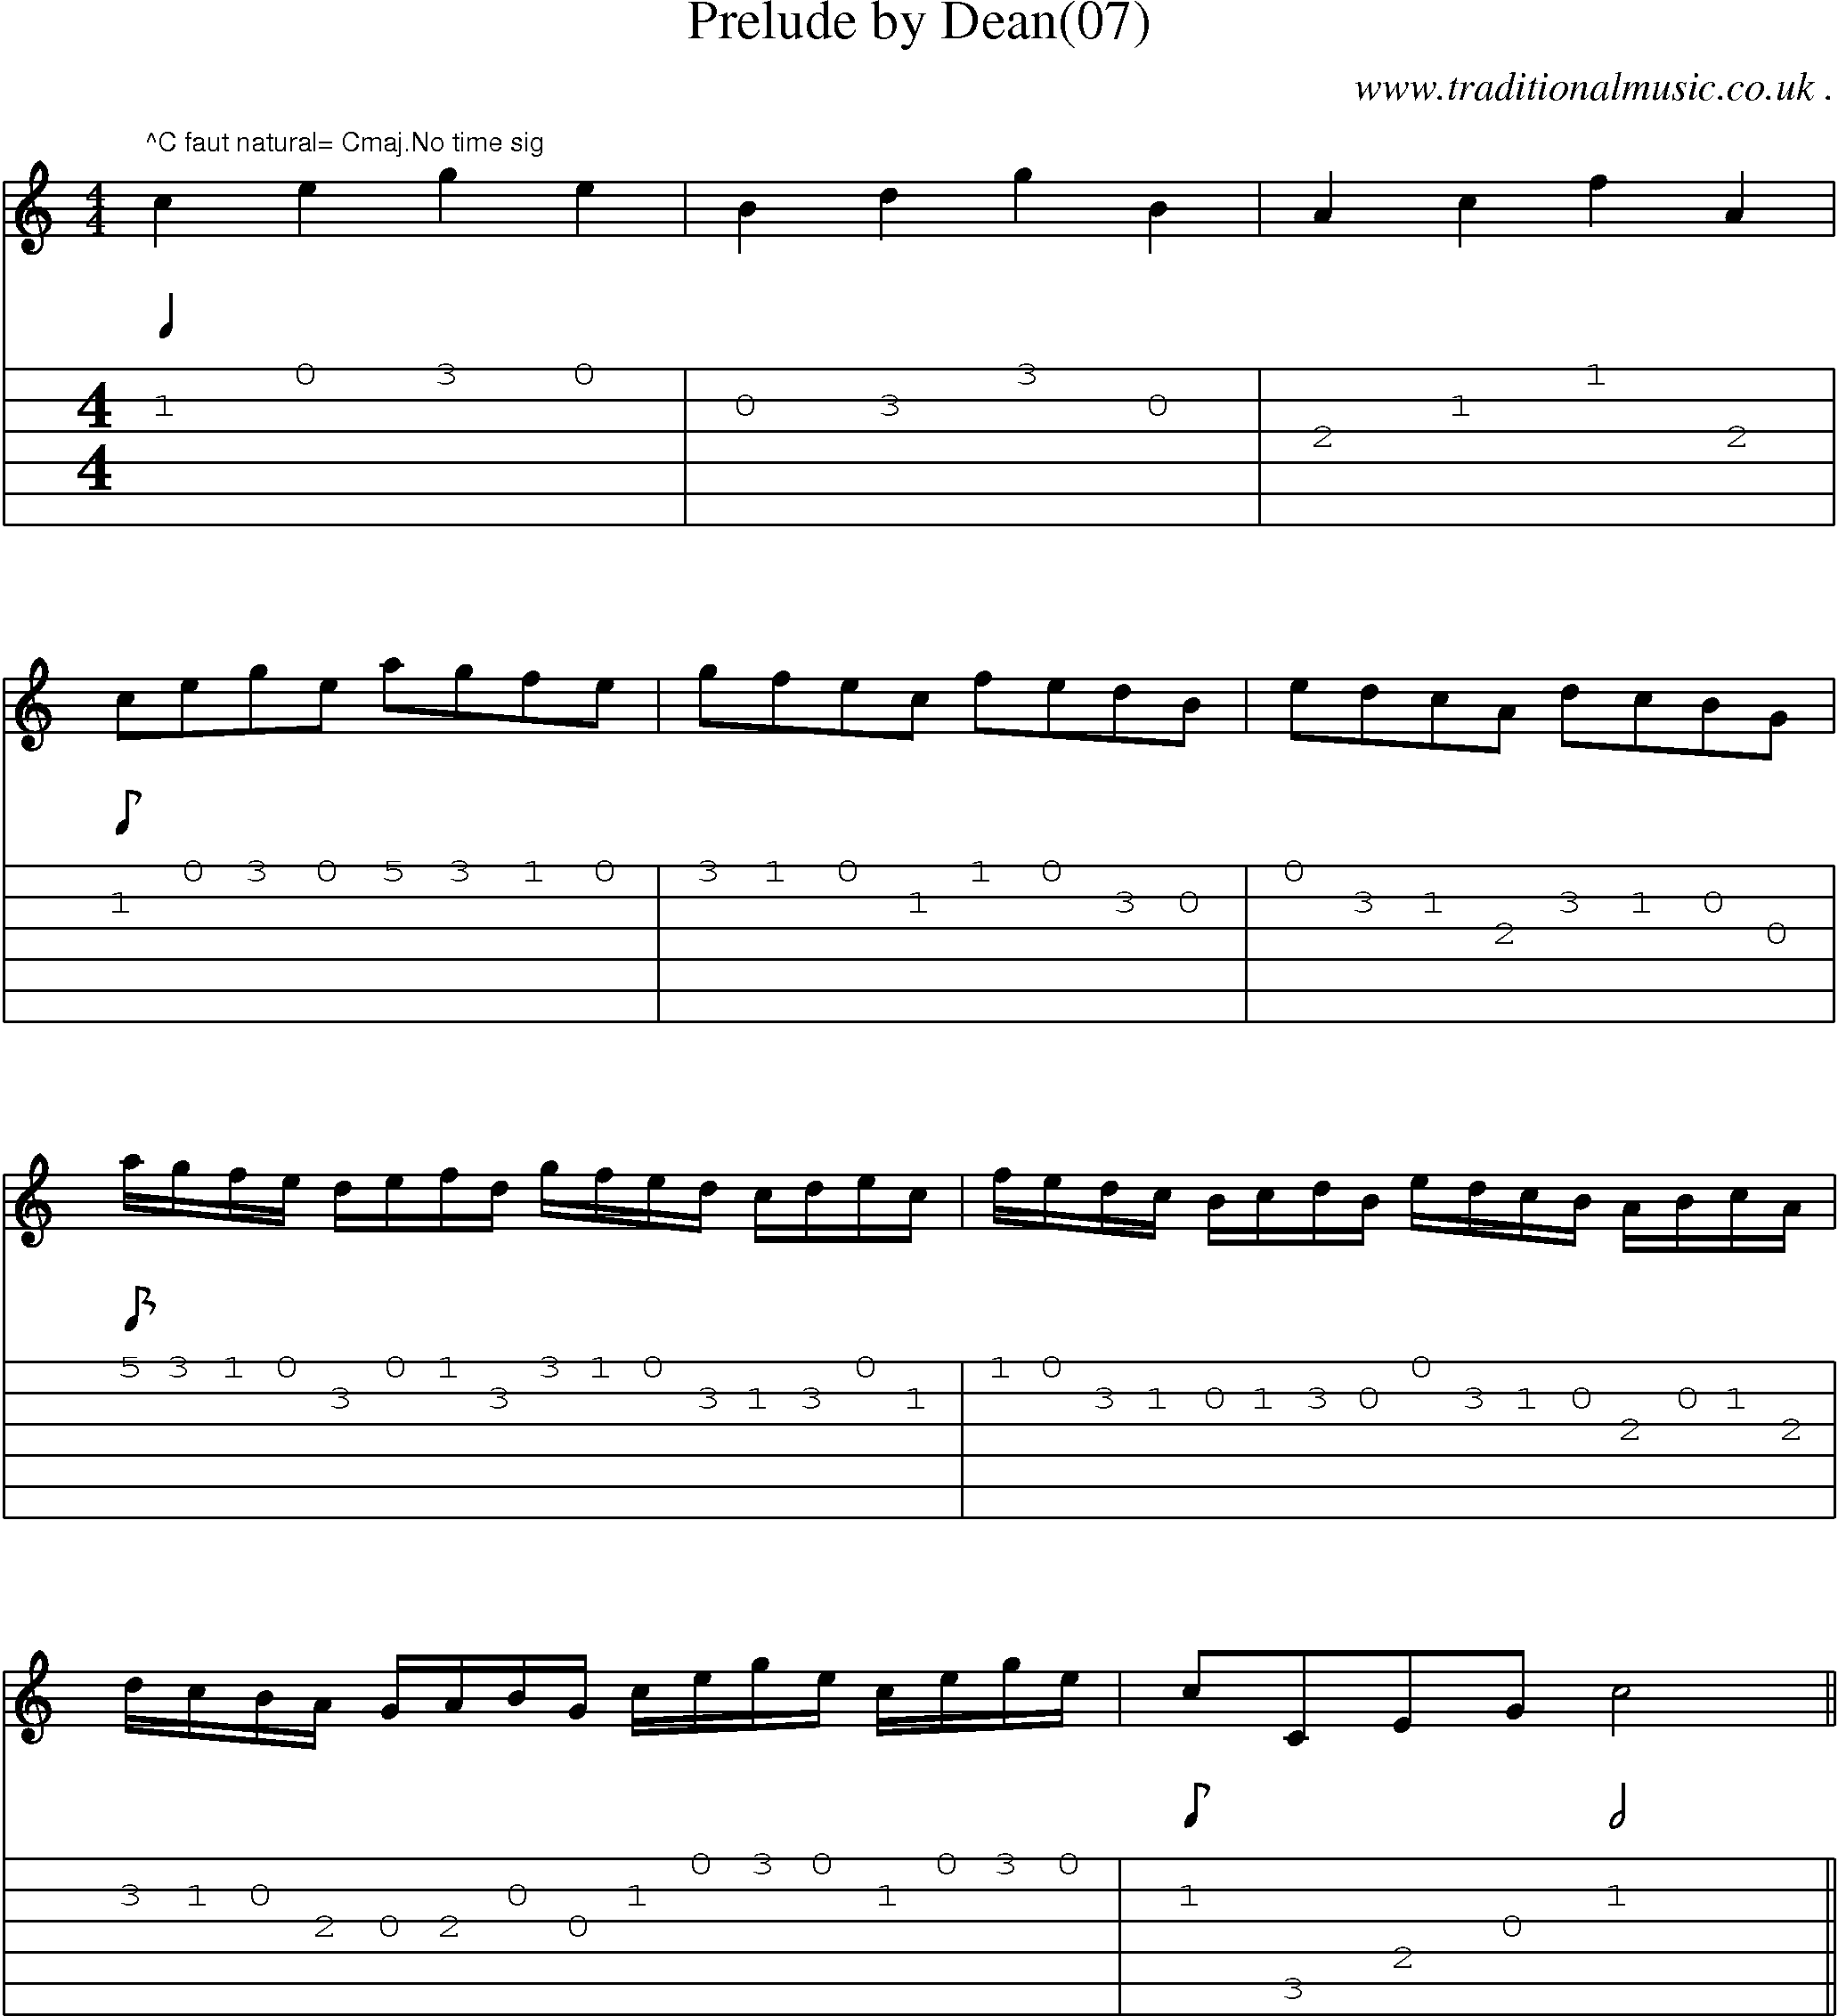 Sheet-Music and Guitar Tabs for Prelude By Dean(07)